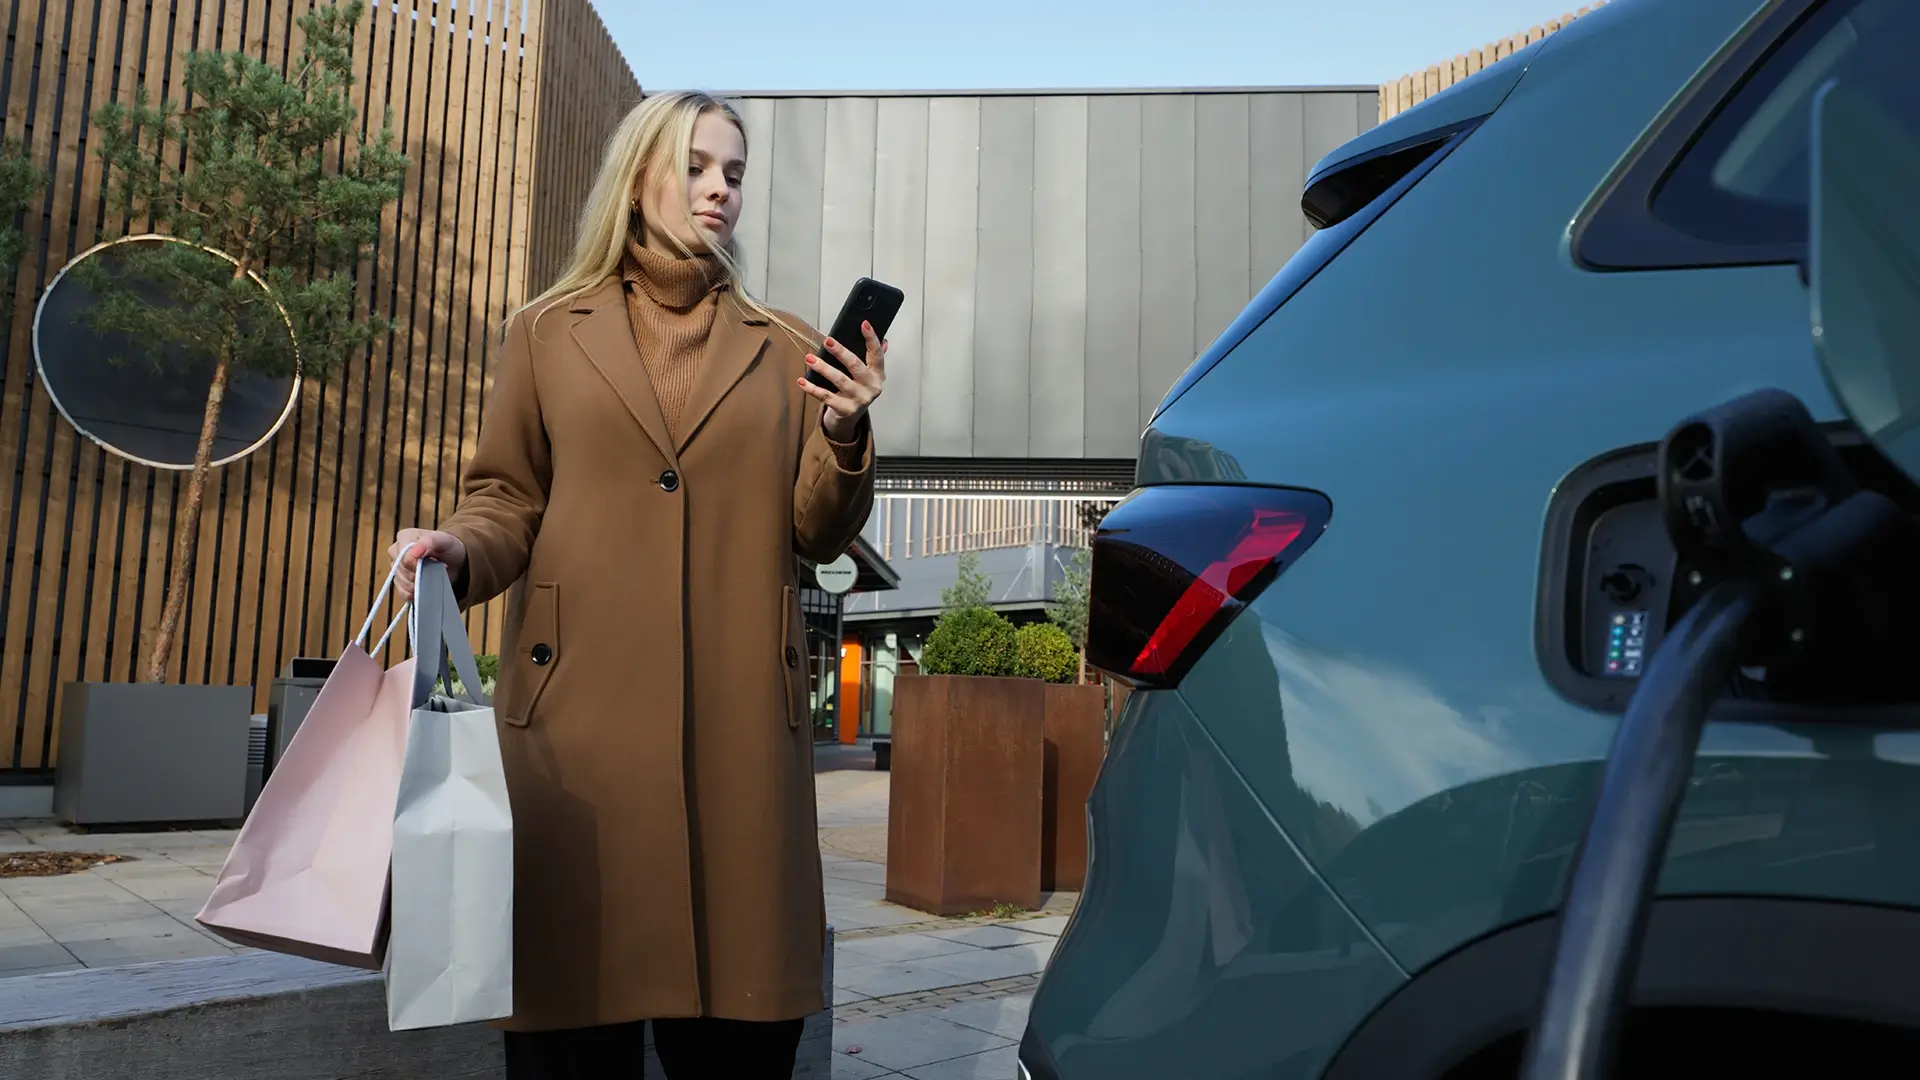 Woman managing EV charging app while charging electric vehicle